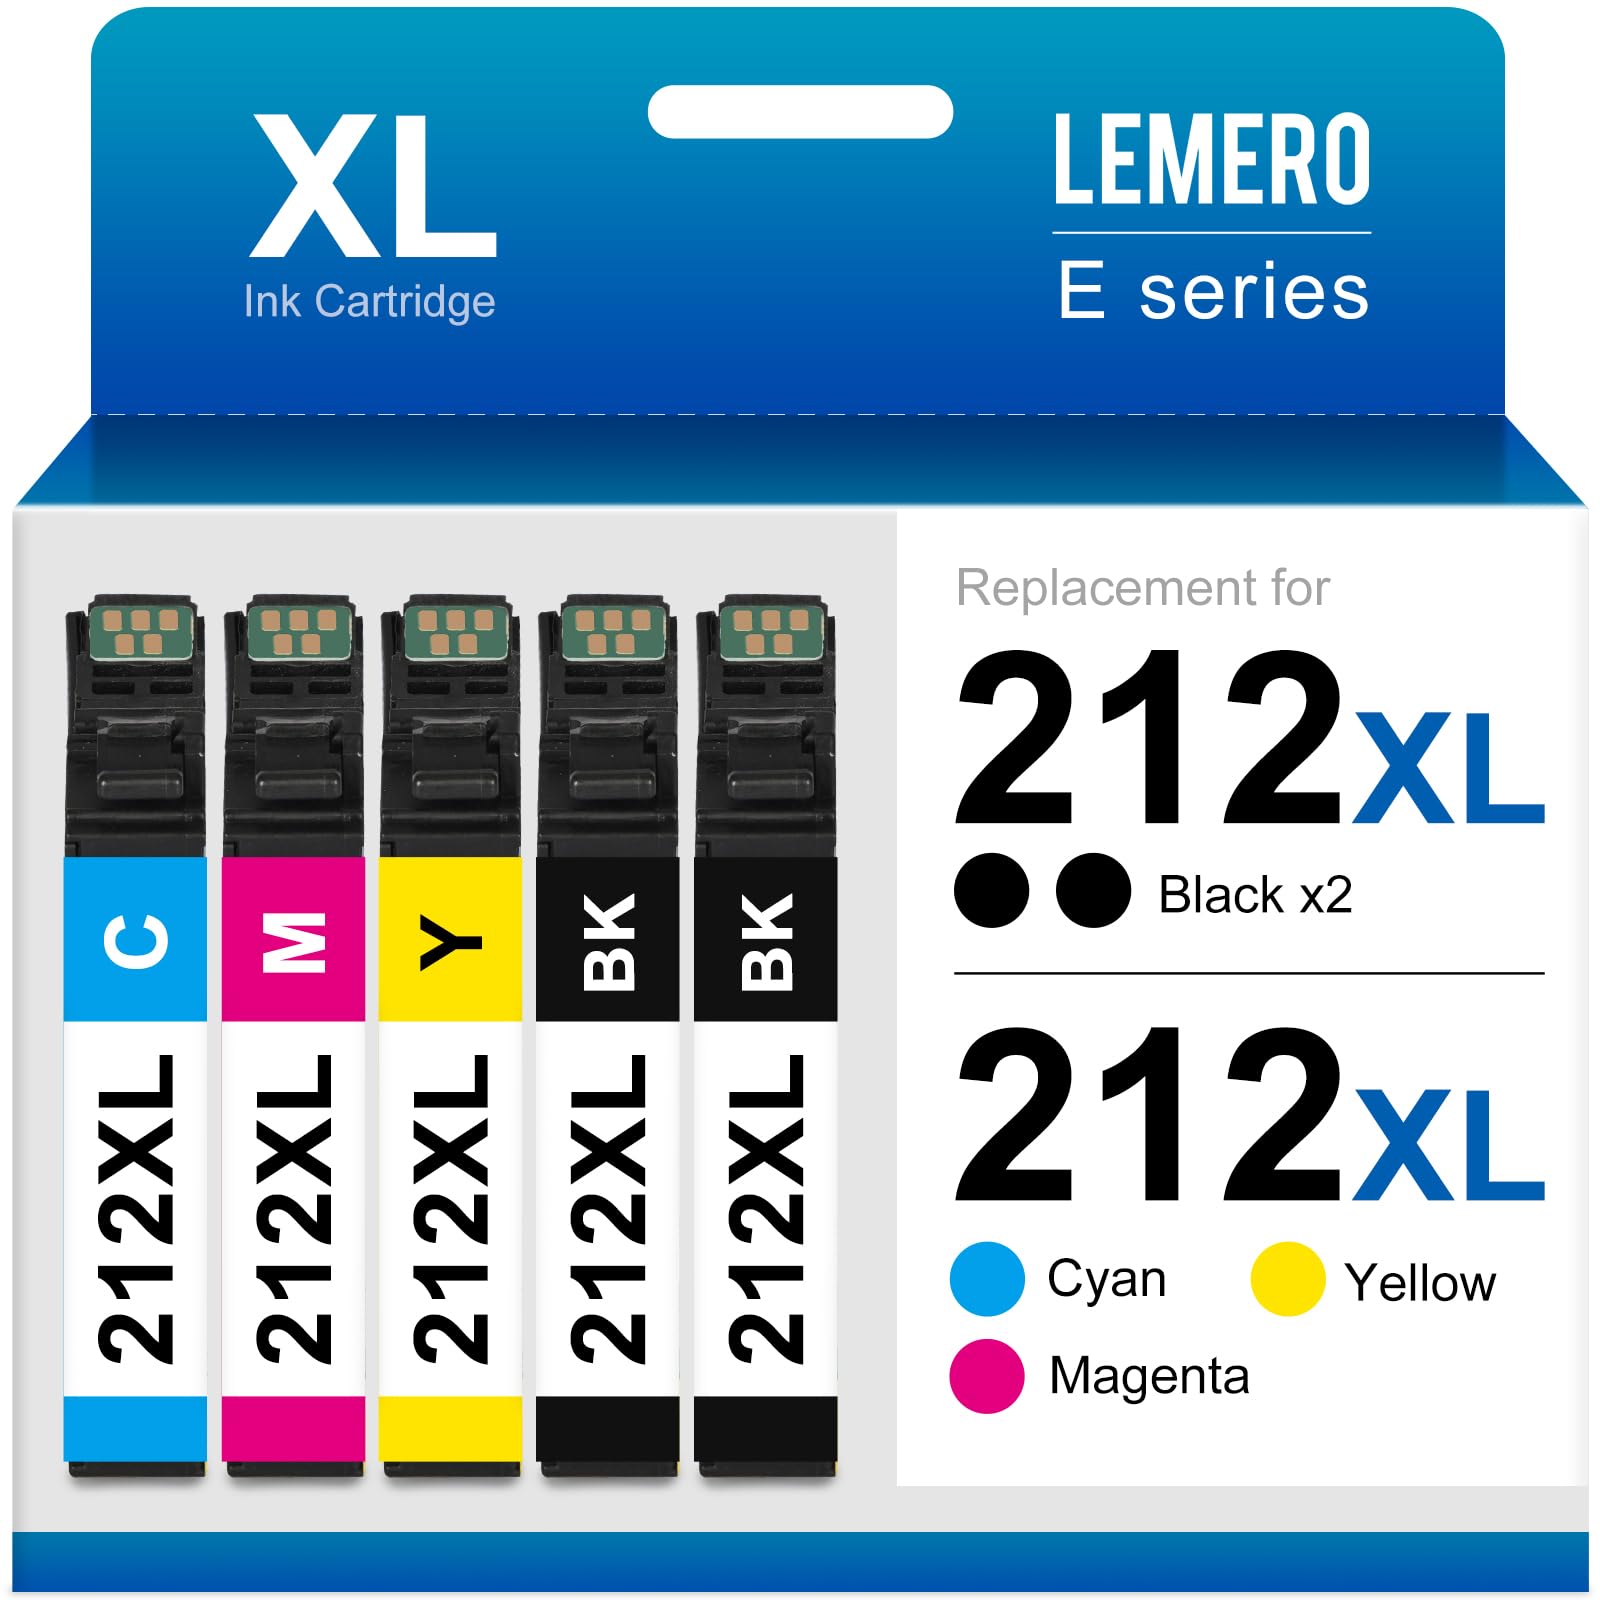 LEMERO E series 212XL high capacity ink cartridges including black, cyan, magenta, and yellow, remanufactured replacements for Epson printers.